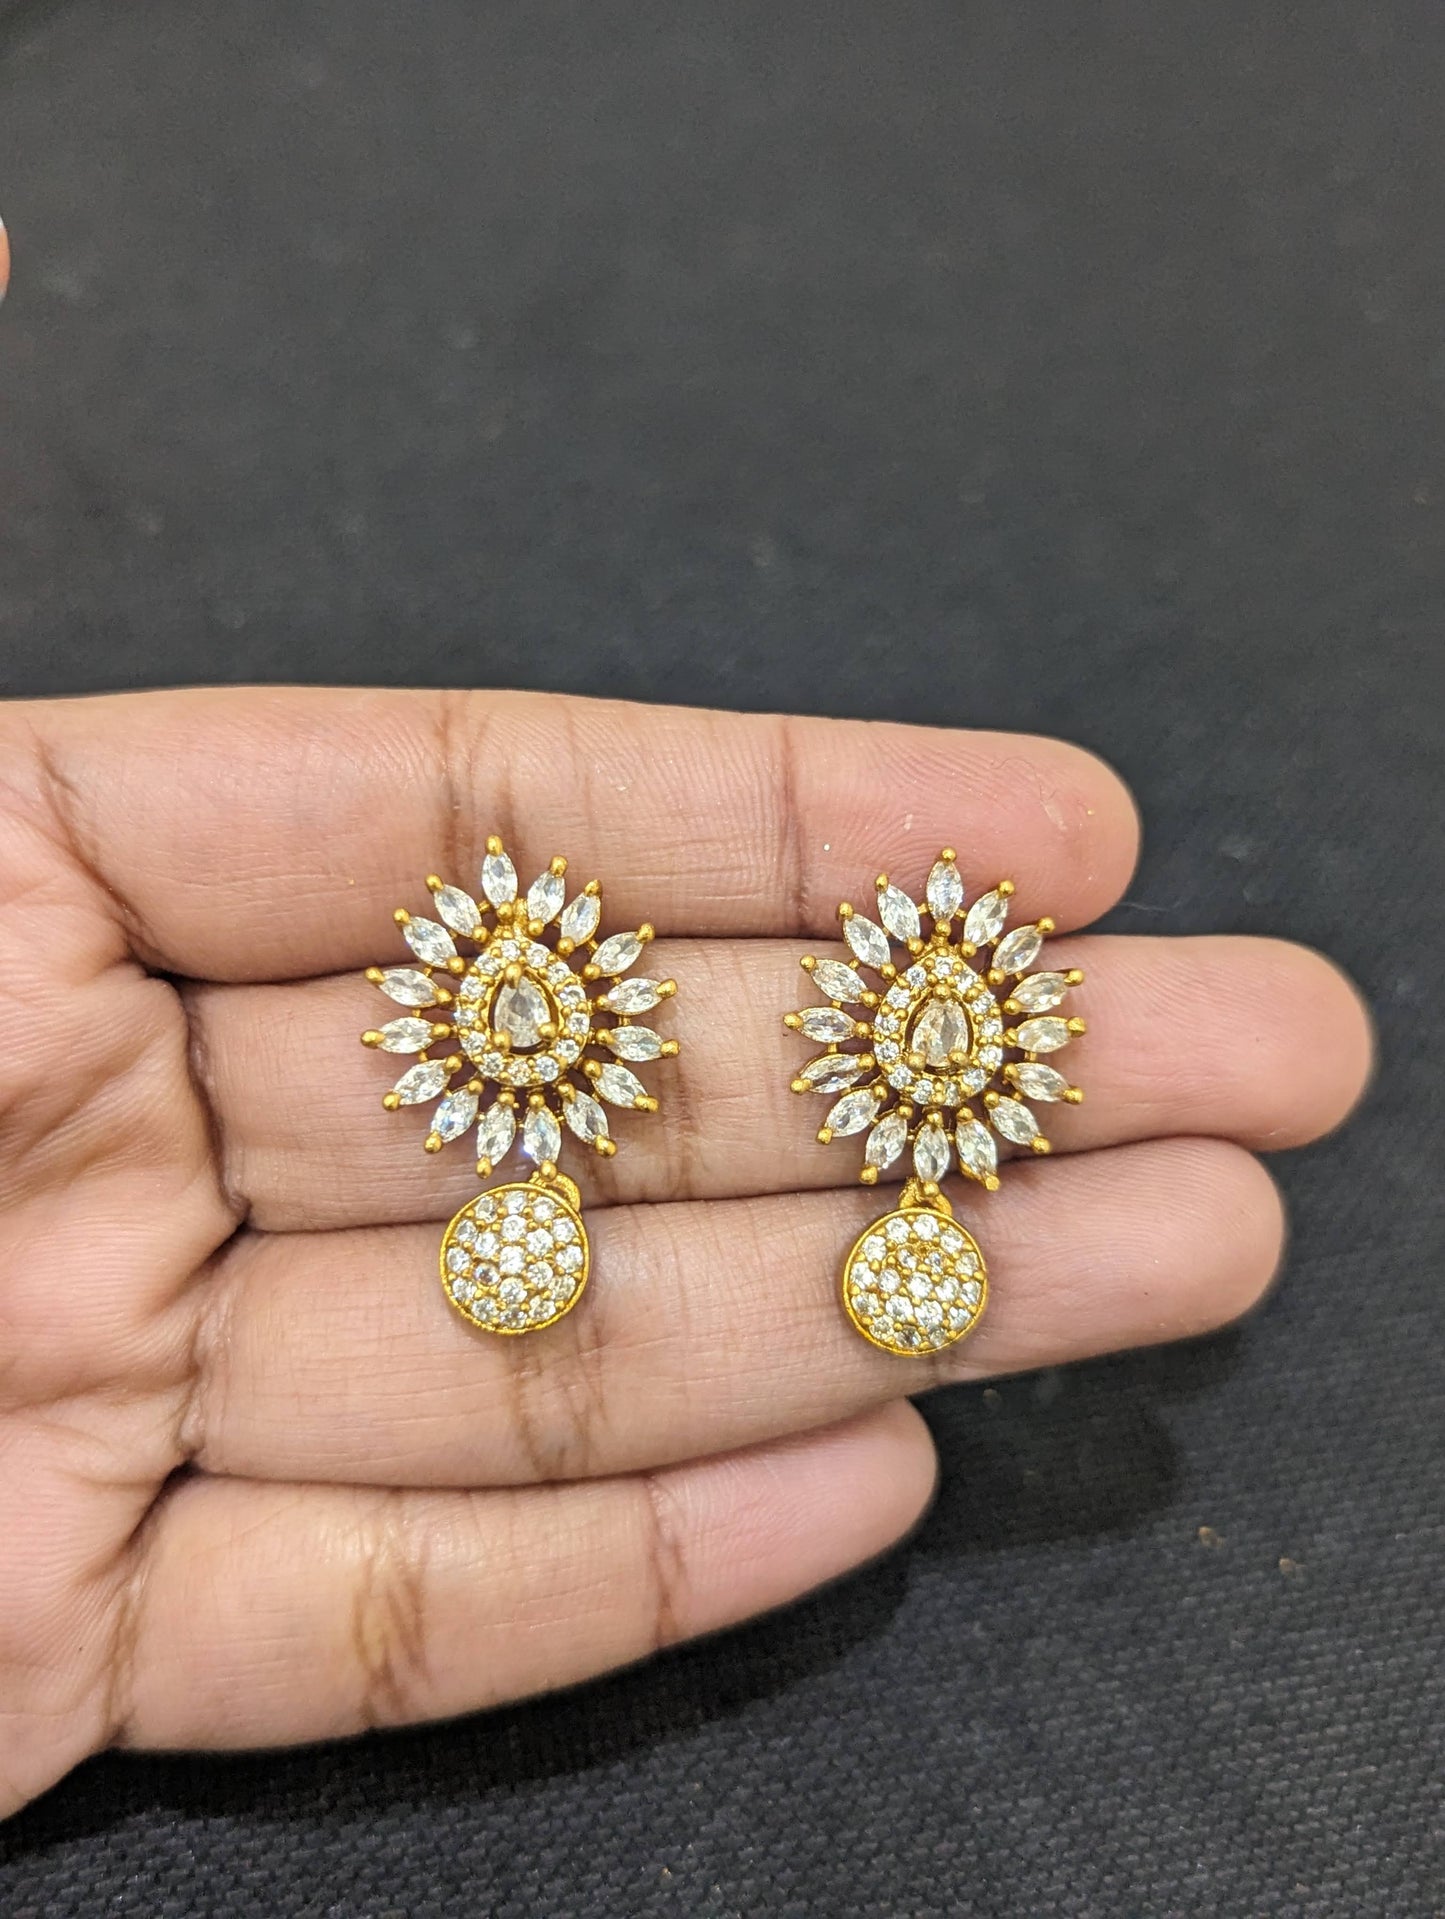 Antique Flower CZ Necklace and Earrings set